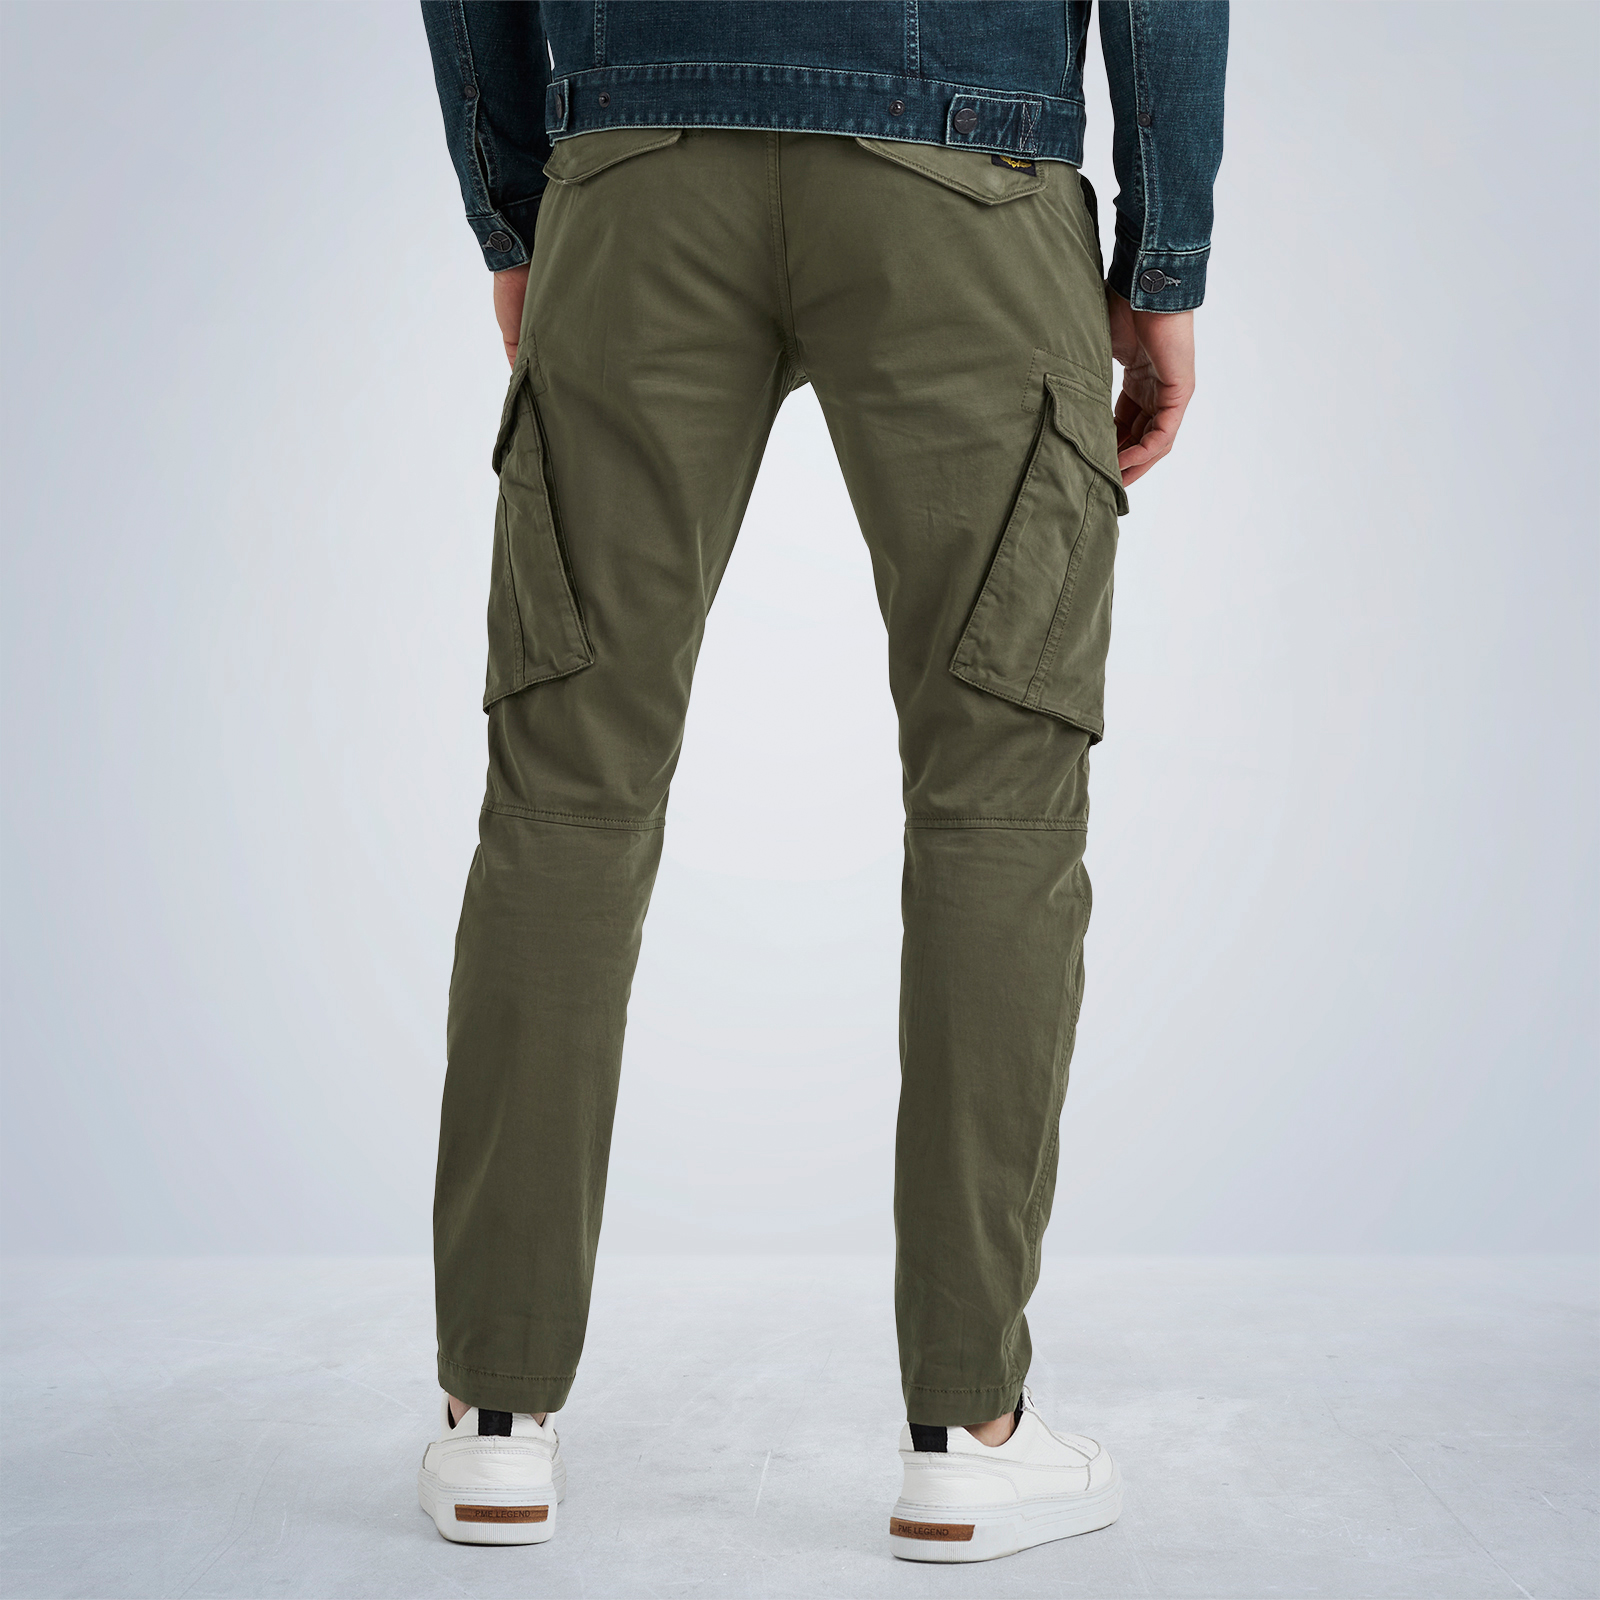 pants - tapered fit | cargo PME shipping LEGEND Nordrop returns Free and